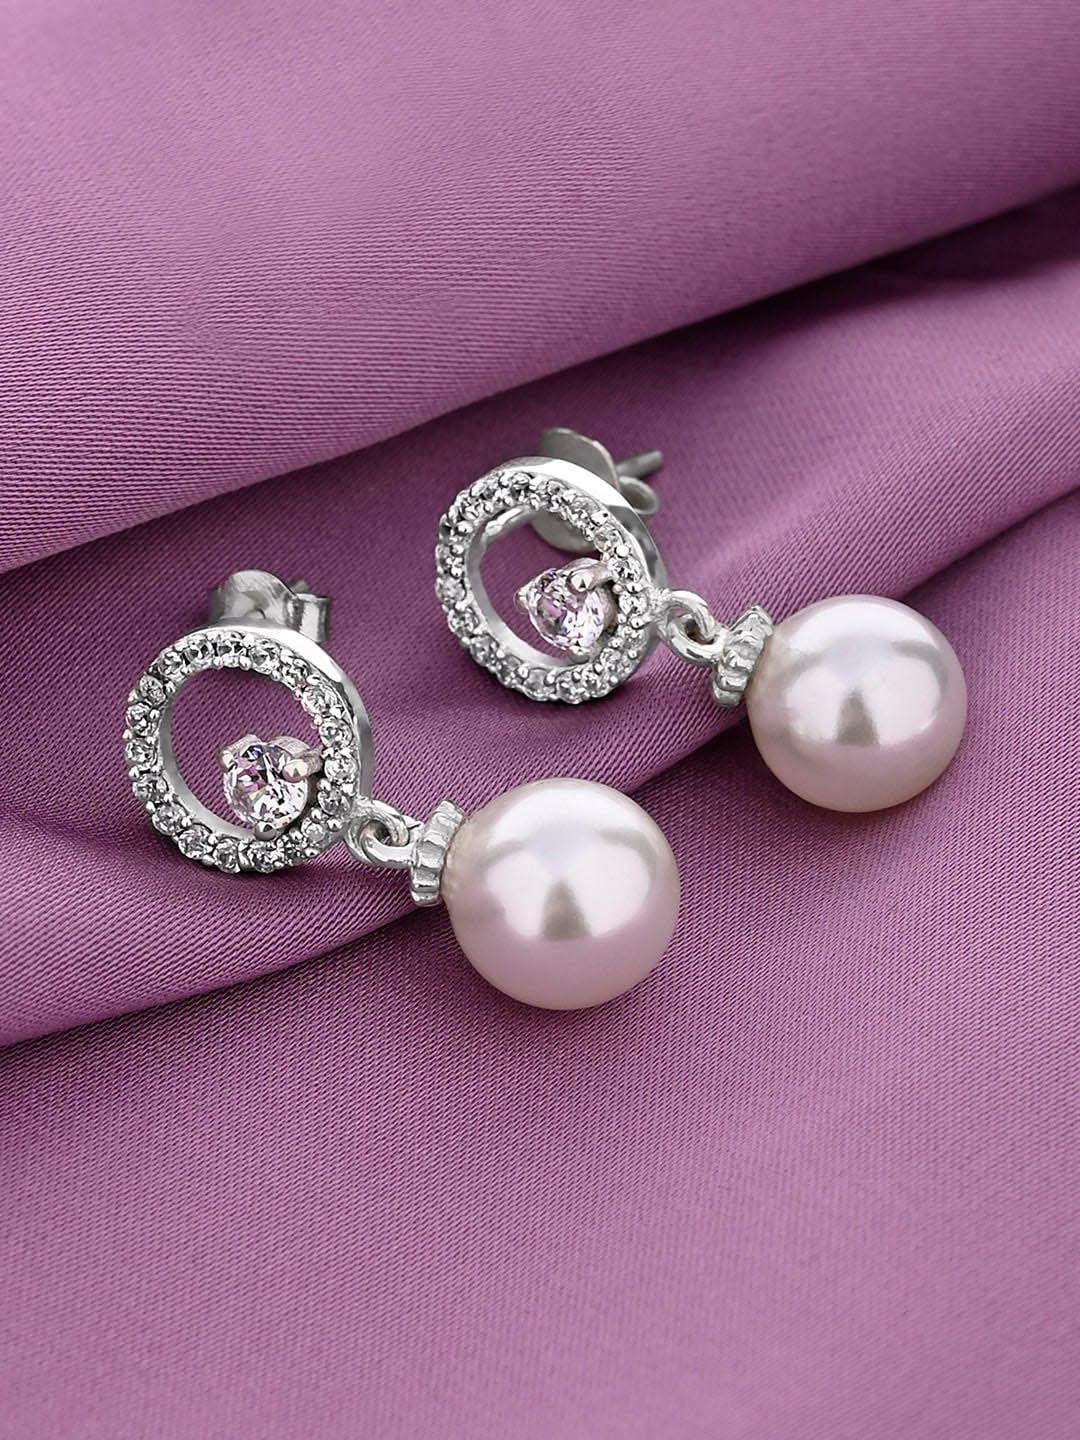 mikoto by fablestreet 925 sterling silver rhodium-plated handcrafted pearl earrings